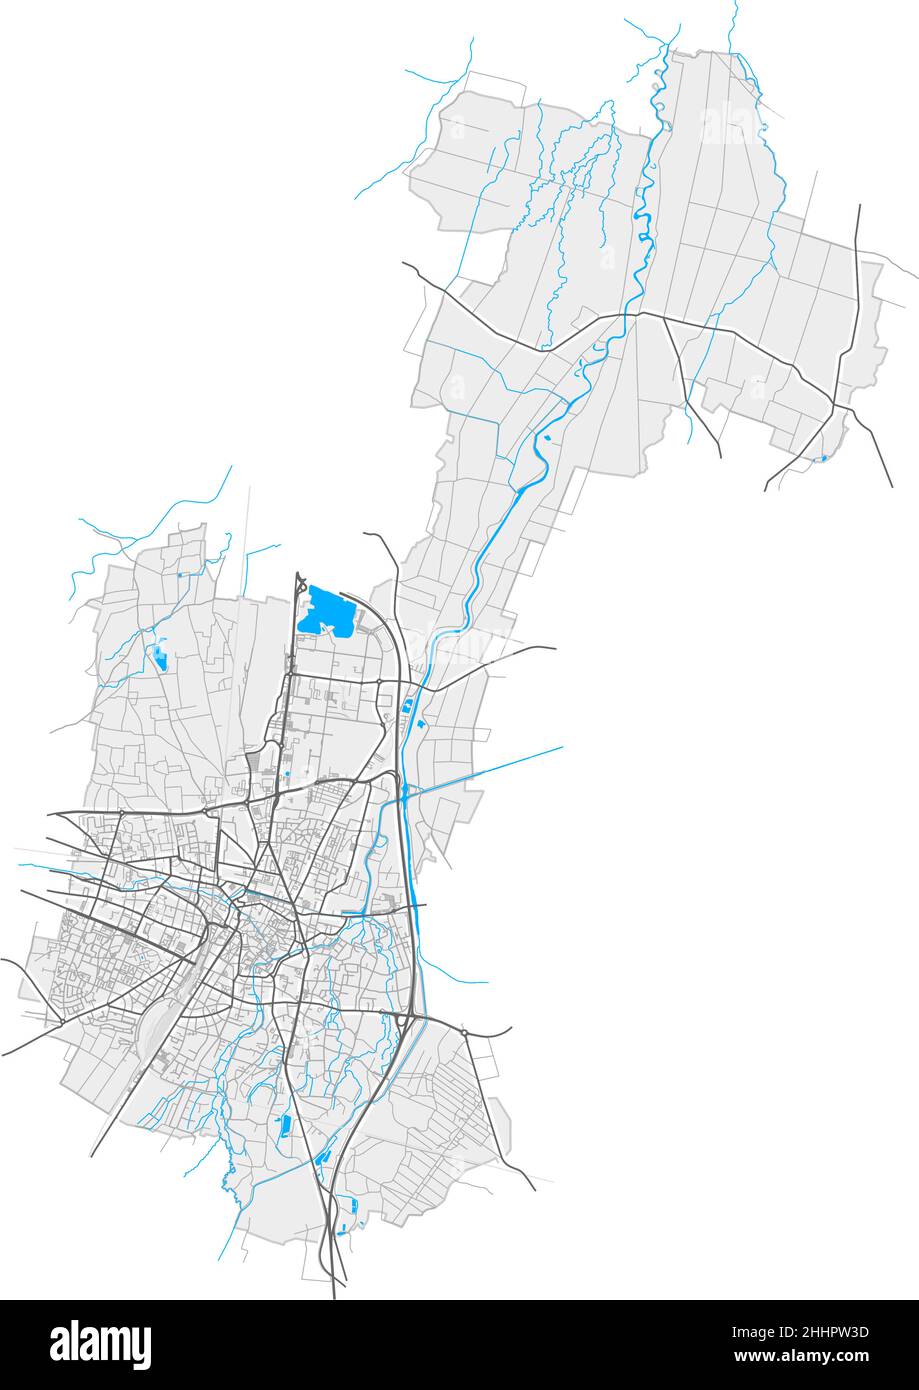 Colmar, Haut-Rhin, France high resolution vector map with city boundaries and editable paths. White outlines for main roads. Many detailed paths. Blue Stock Vector